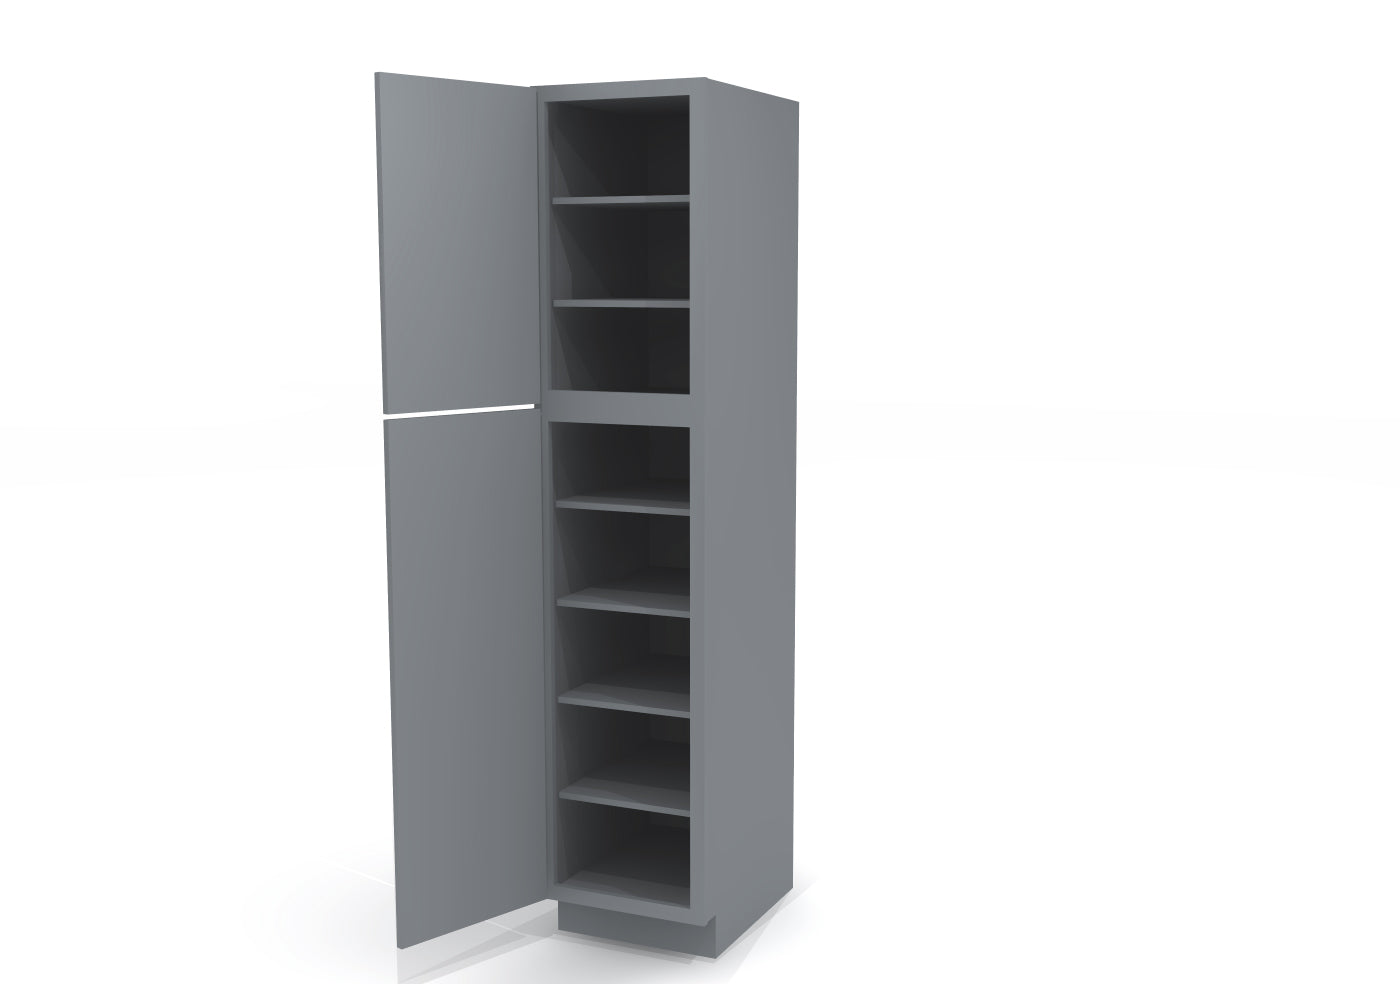 Utility Pantry Single Door 84" by 18" Wide Gray Shaker Cabinet